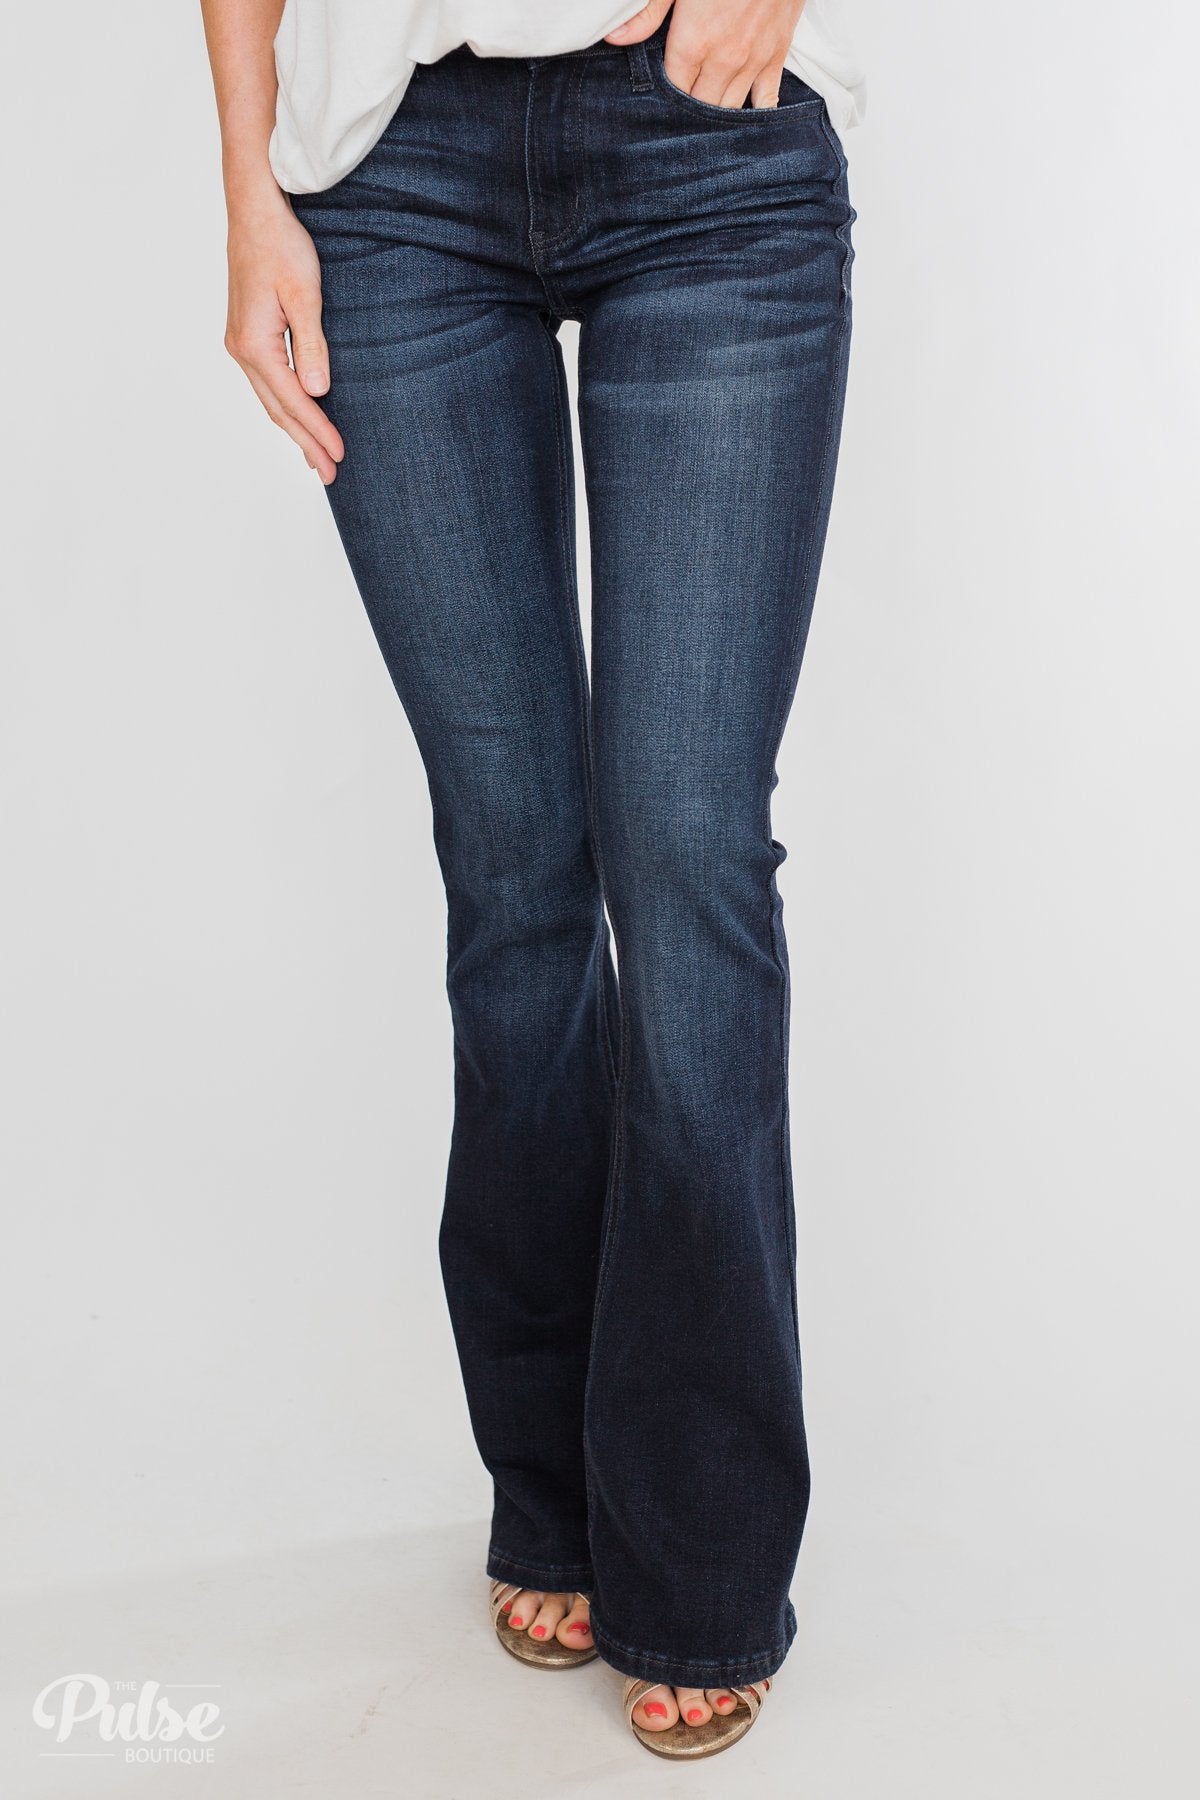 Kan Can Jeans- Dark Wash Flare